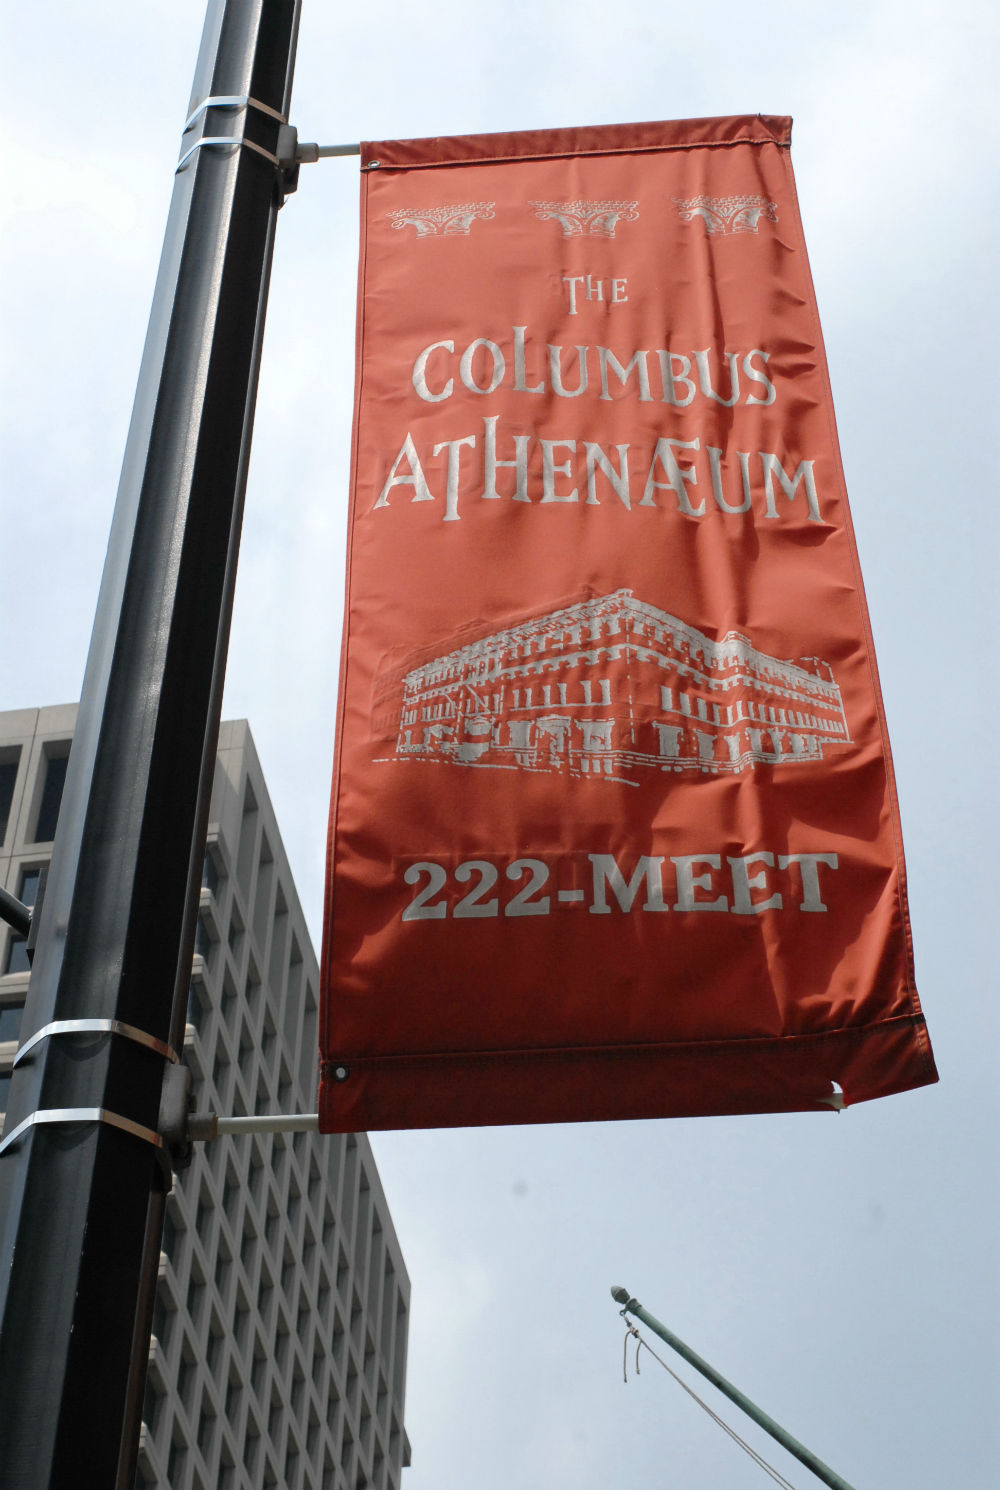 The Columbus Athenaeum wedding venue visited by officiant, Damian King